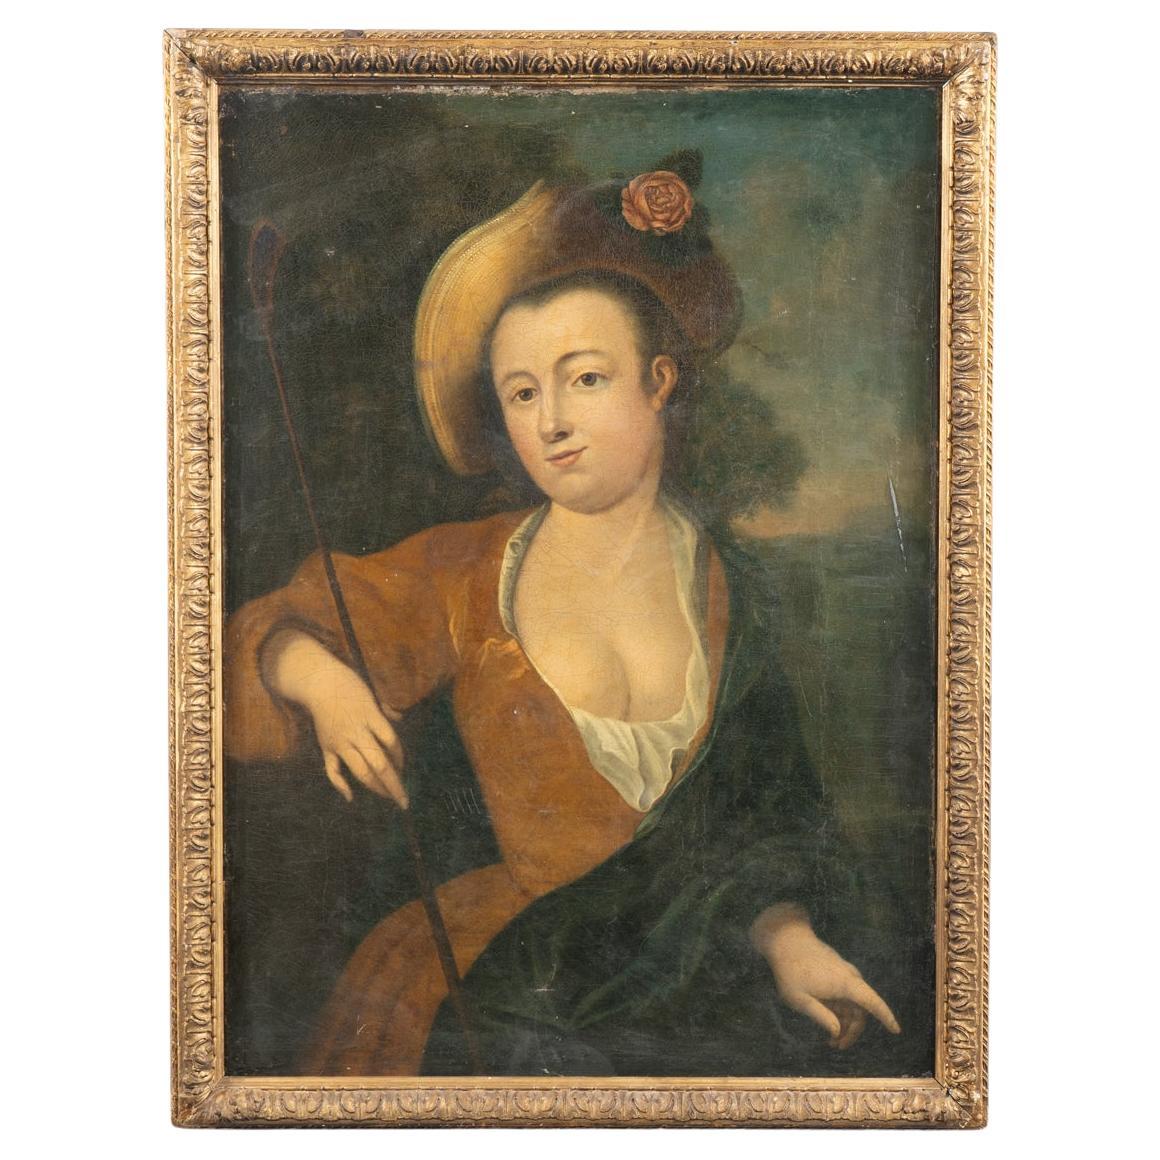 Original Oil on Canvas Portrait of Lady With Riding Crop, Sweden circa 1700's